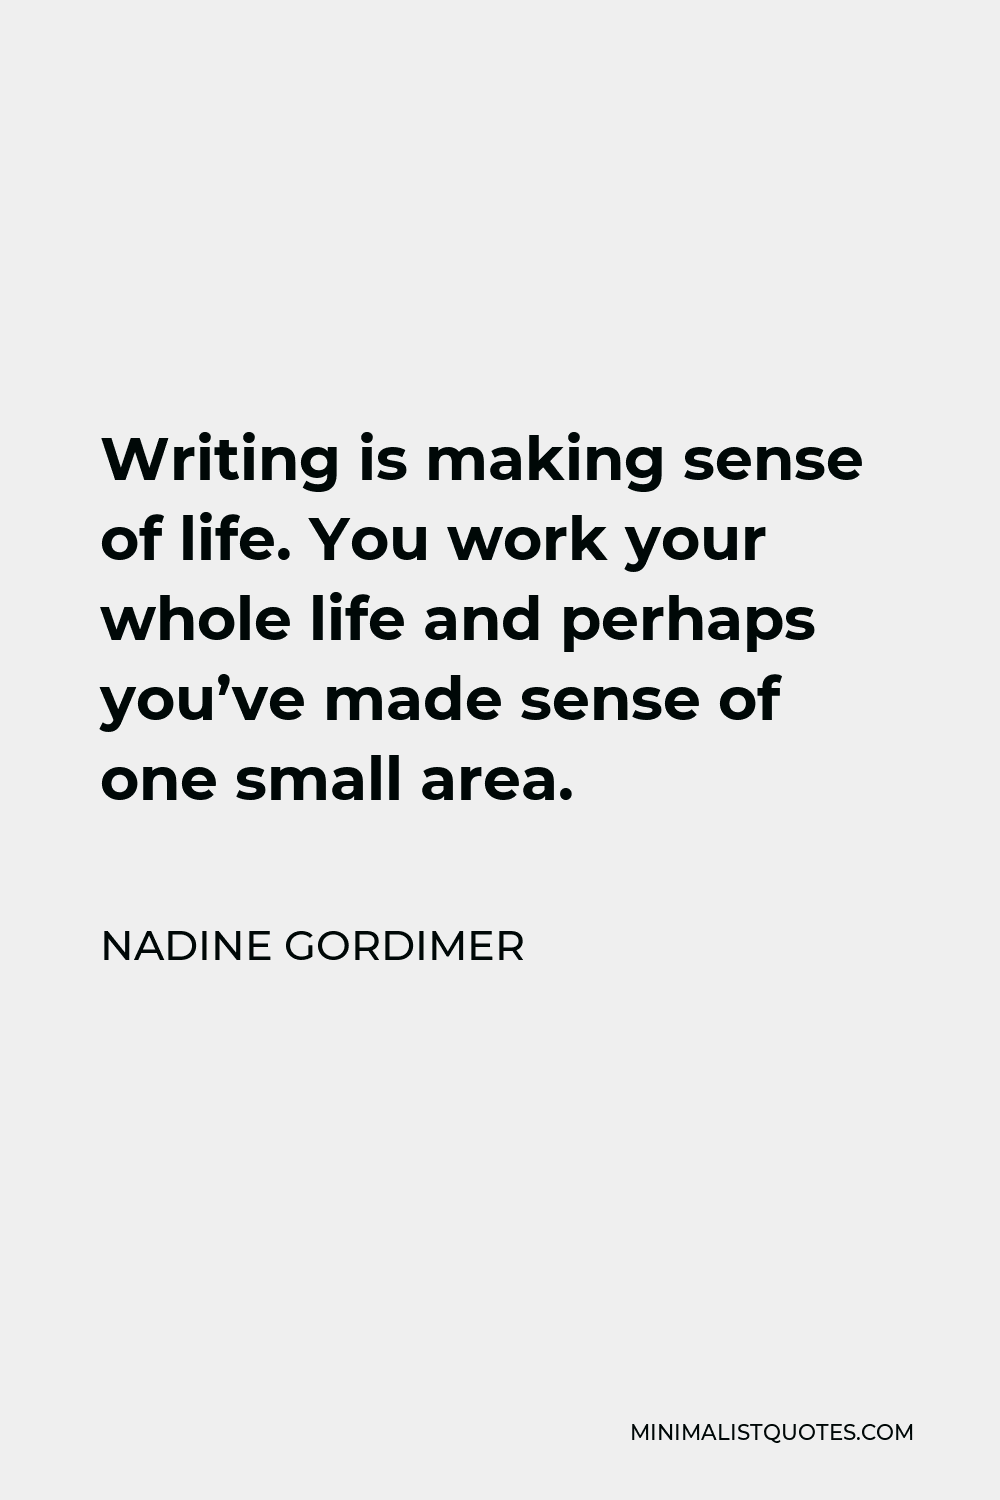 Nadine Gordimer Quote - Writing is making sense of life. You work your whole life and perhaps you’ve made sense of one small area.